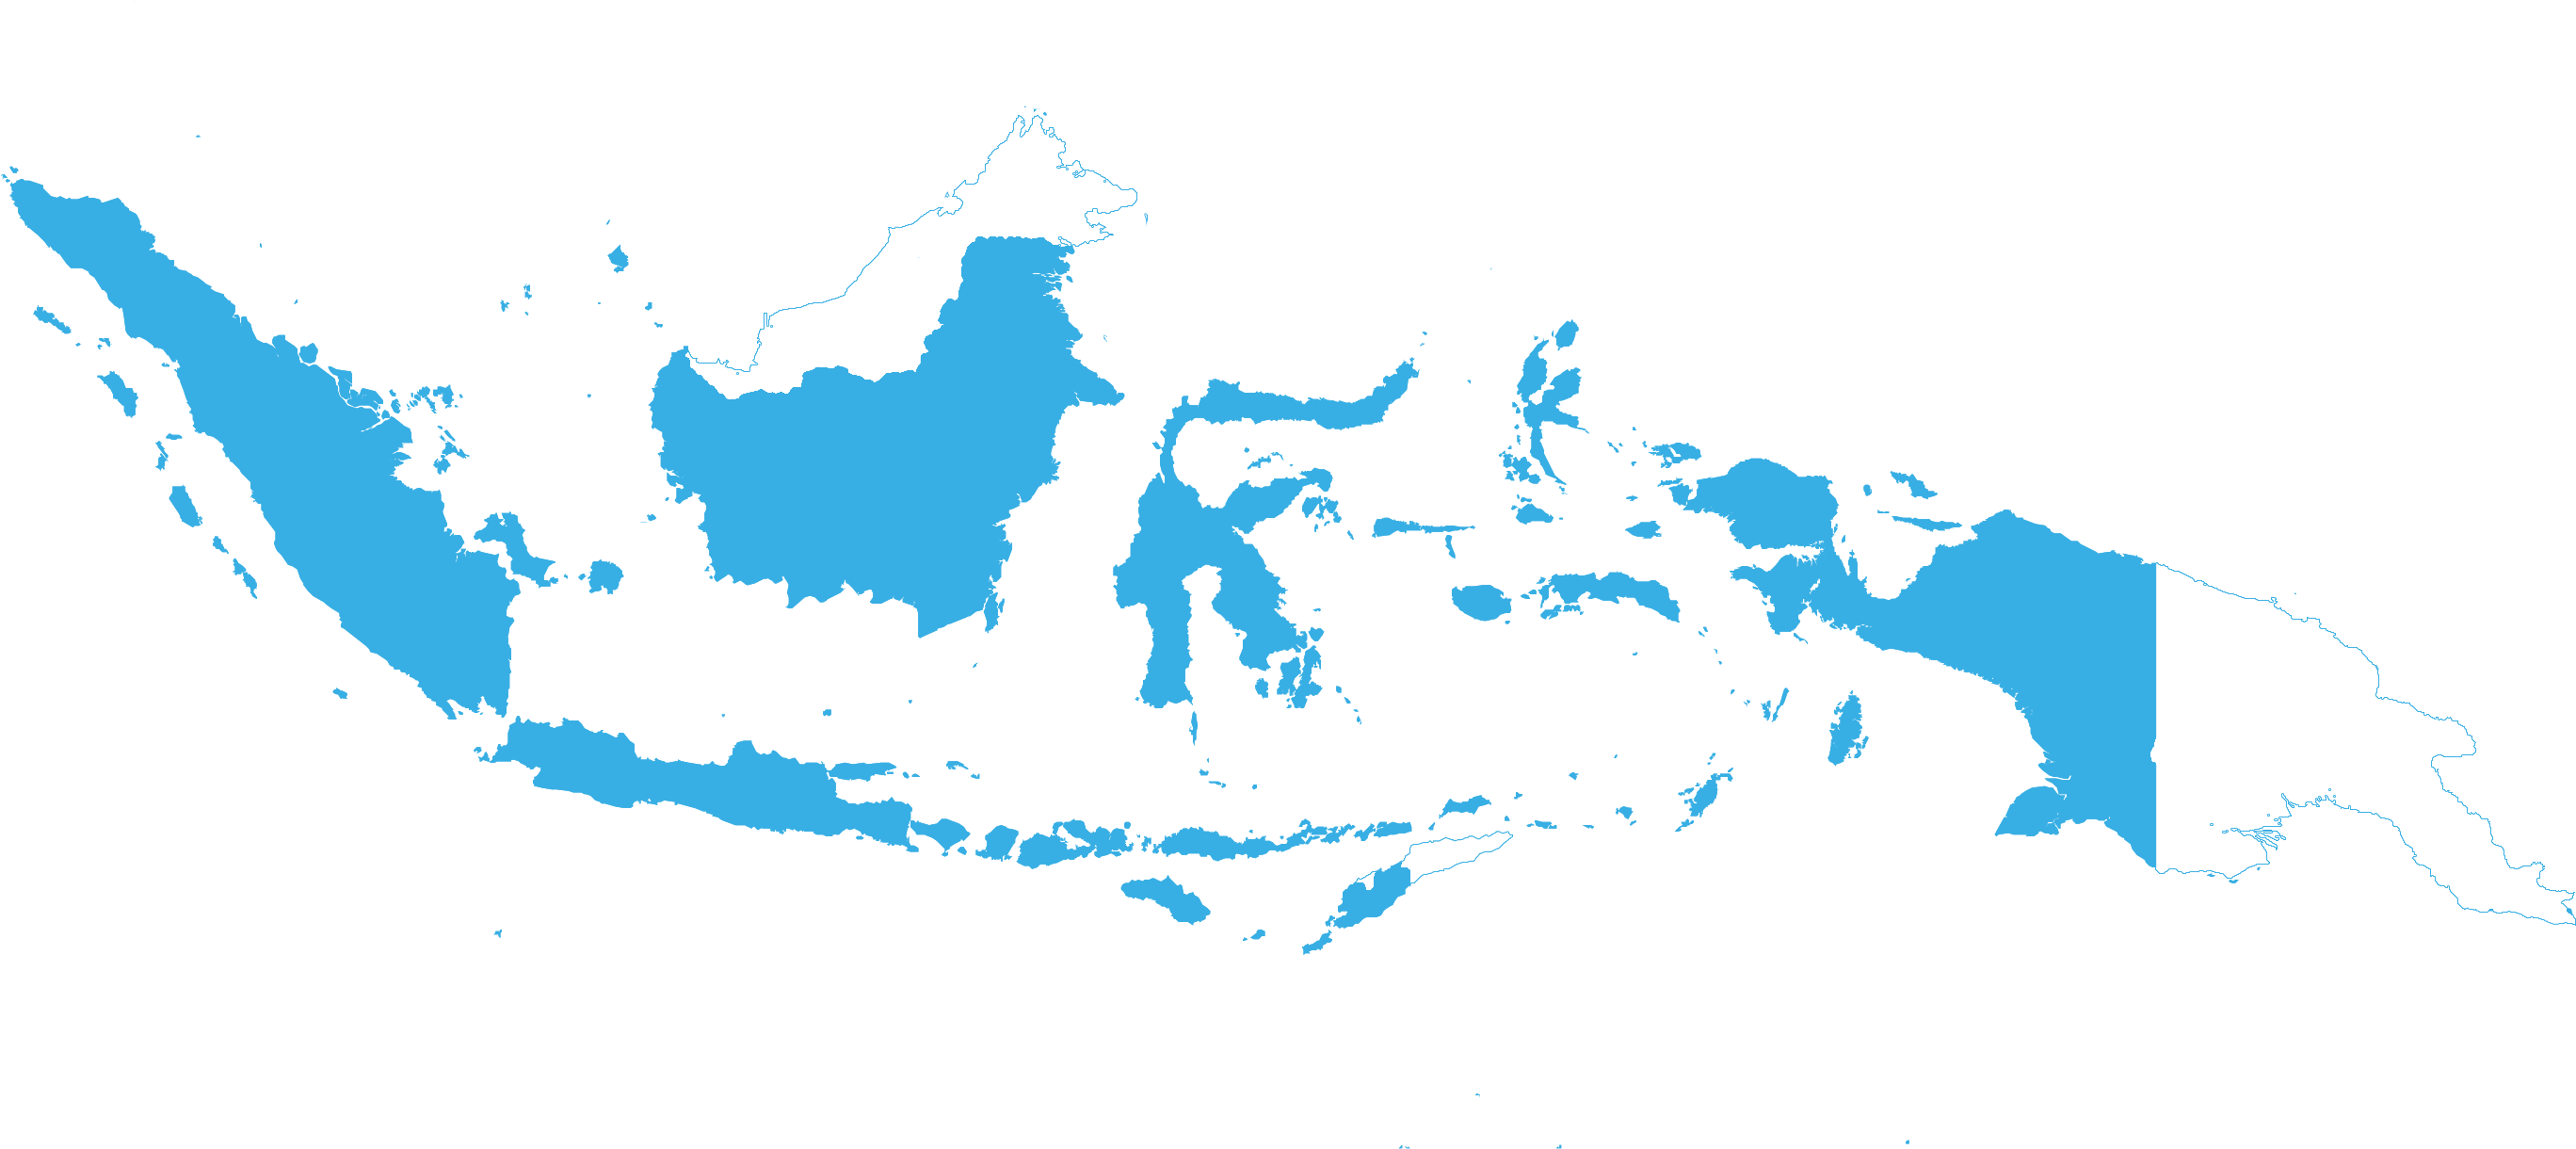 download png peta indonesia indonesia map vector png image with no background pngkey com indonesia map vector png image with no